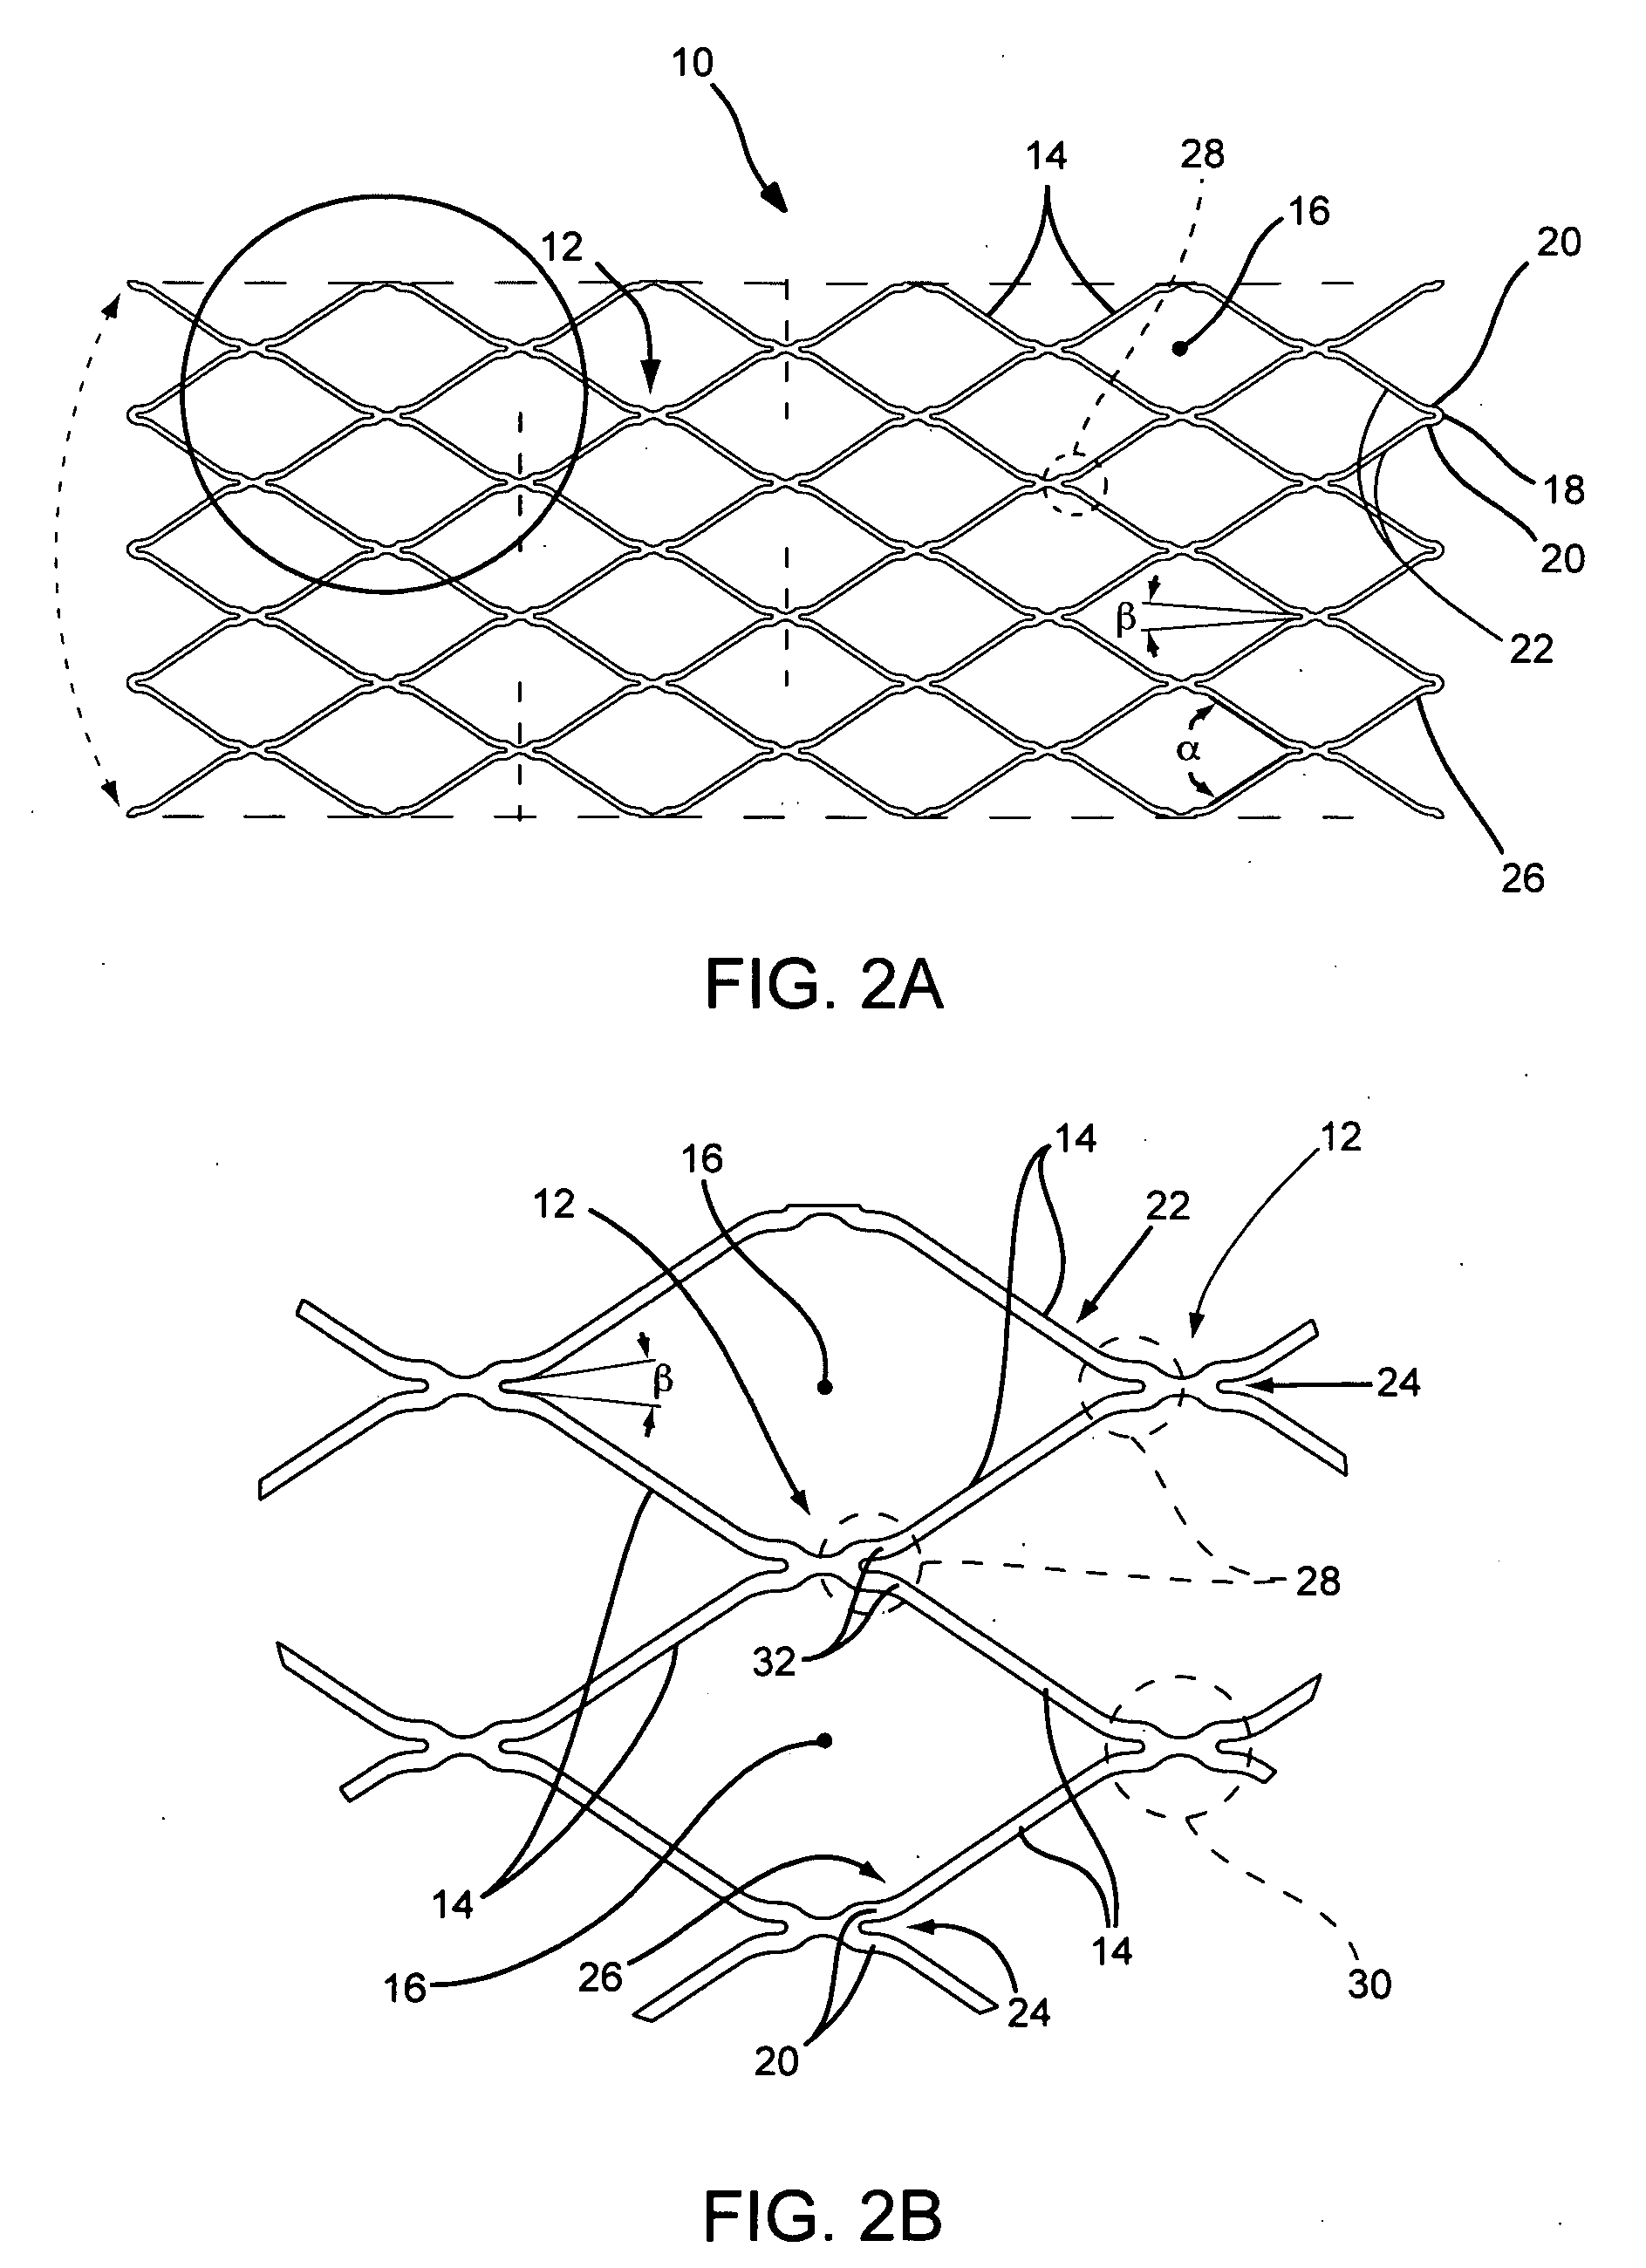 Stent delivery and guidewire systems